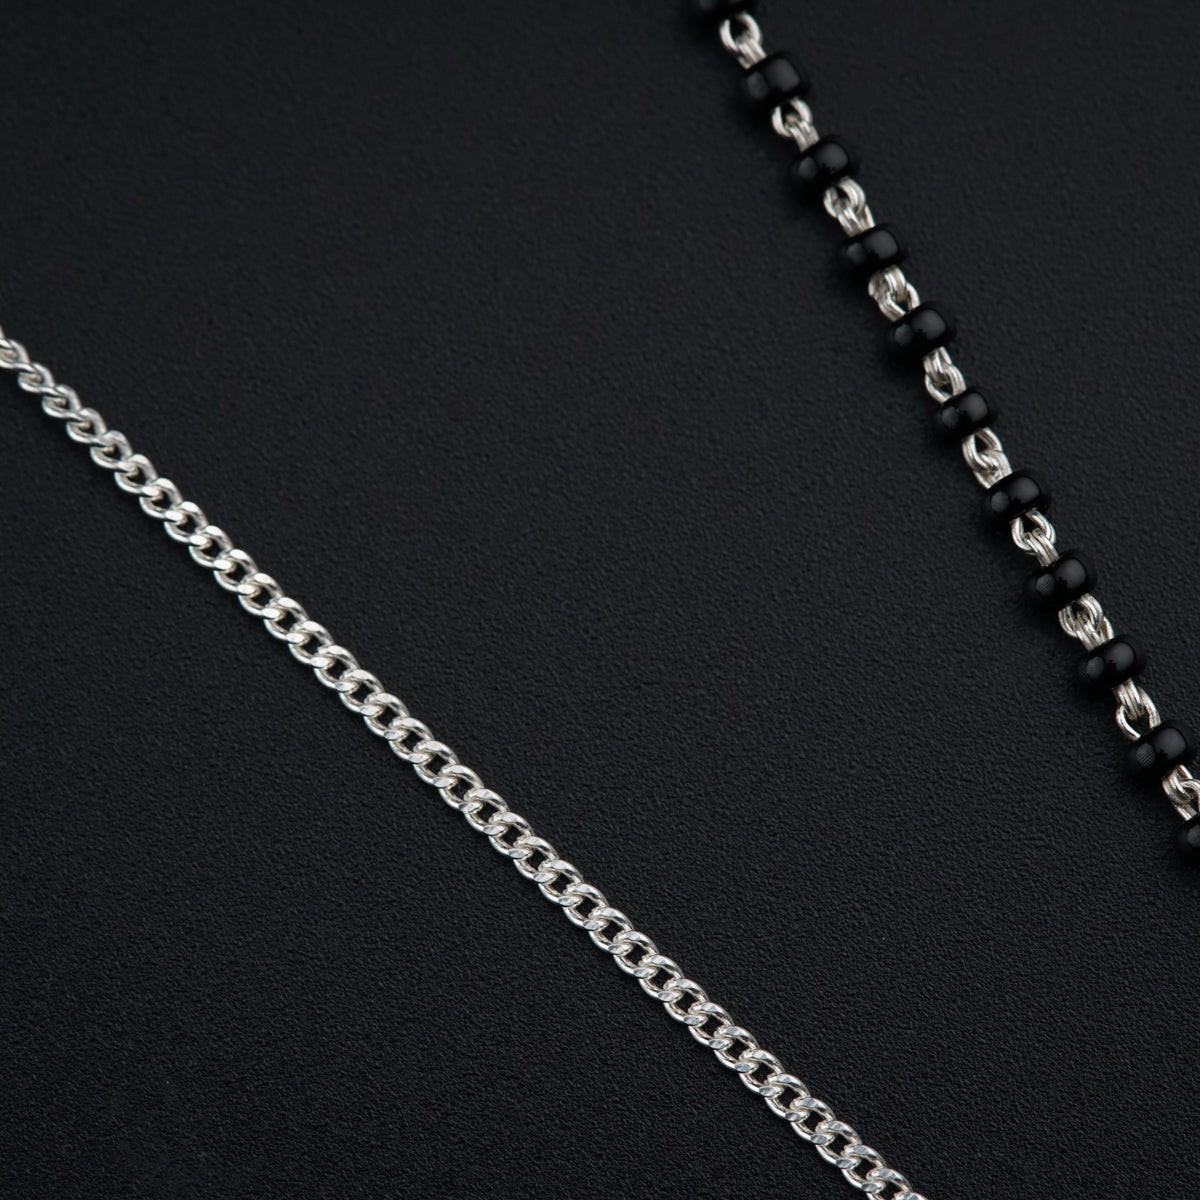 a black and silver necklace with a chain attached to it